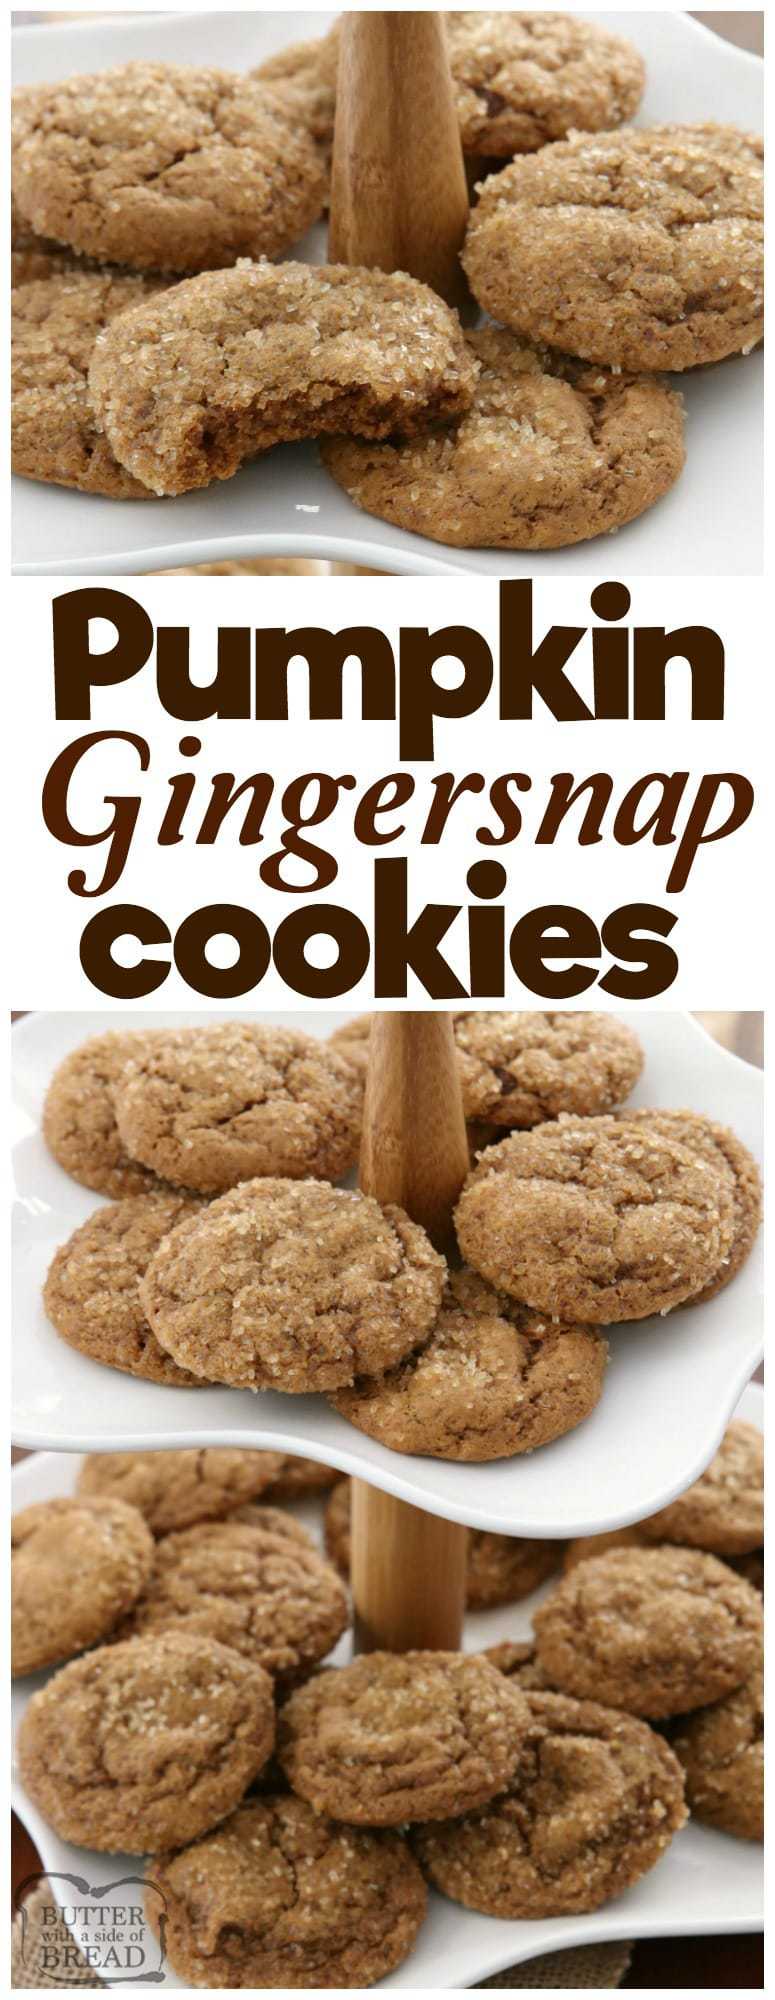 Pumpkin Gingersnap Cookies are soft, perfectly spiced gingersnap cookies made with pumpkin! Classic cookie recipe with a twist perfect for holiday baking. Perfect #gingersnap #cookie #recipe for the #holidays from Butter With A Side of Bread #baking #